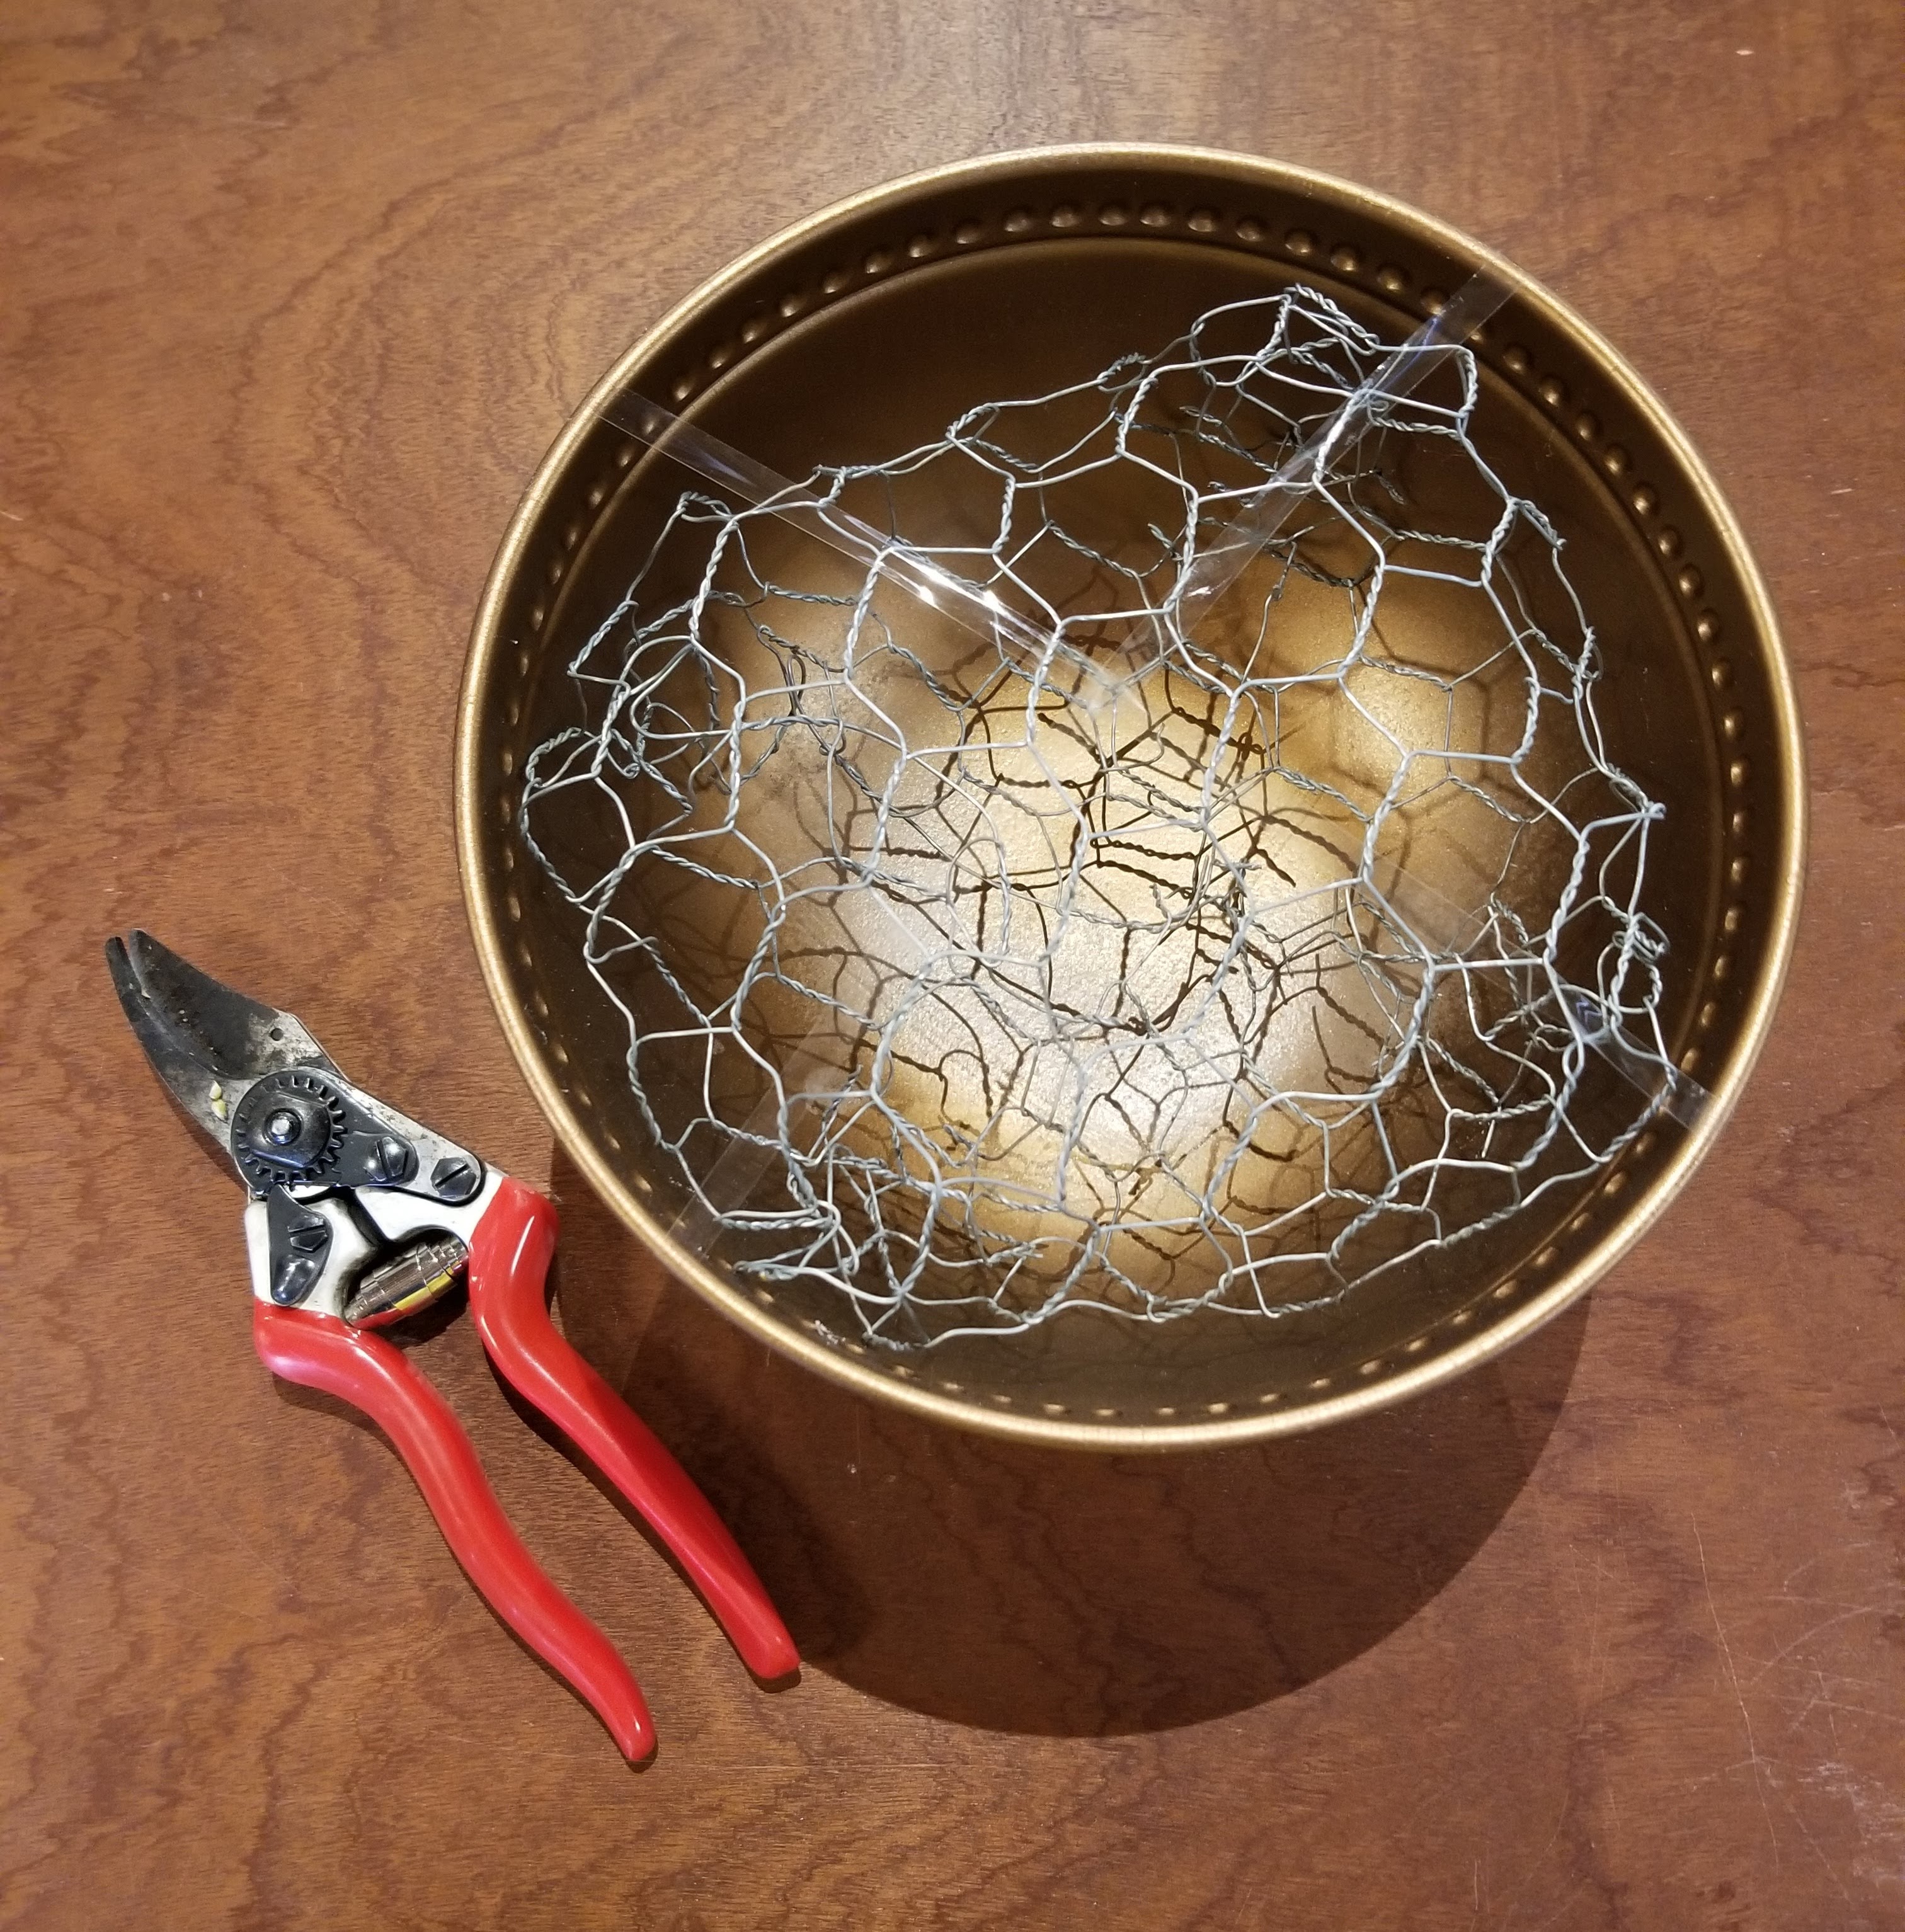 centerpiece bowl with chicken wire taped